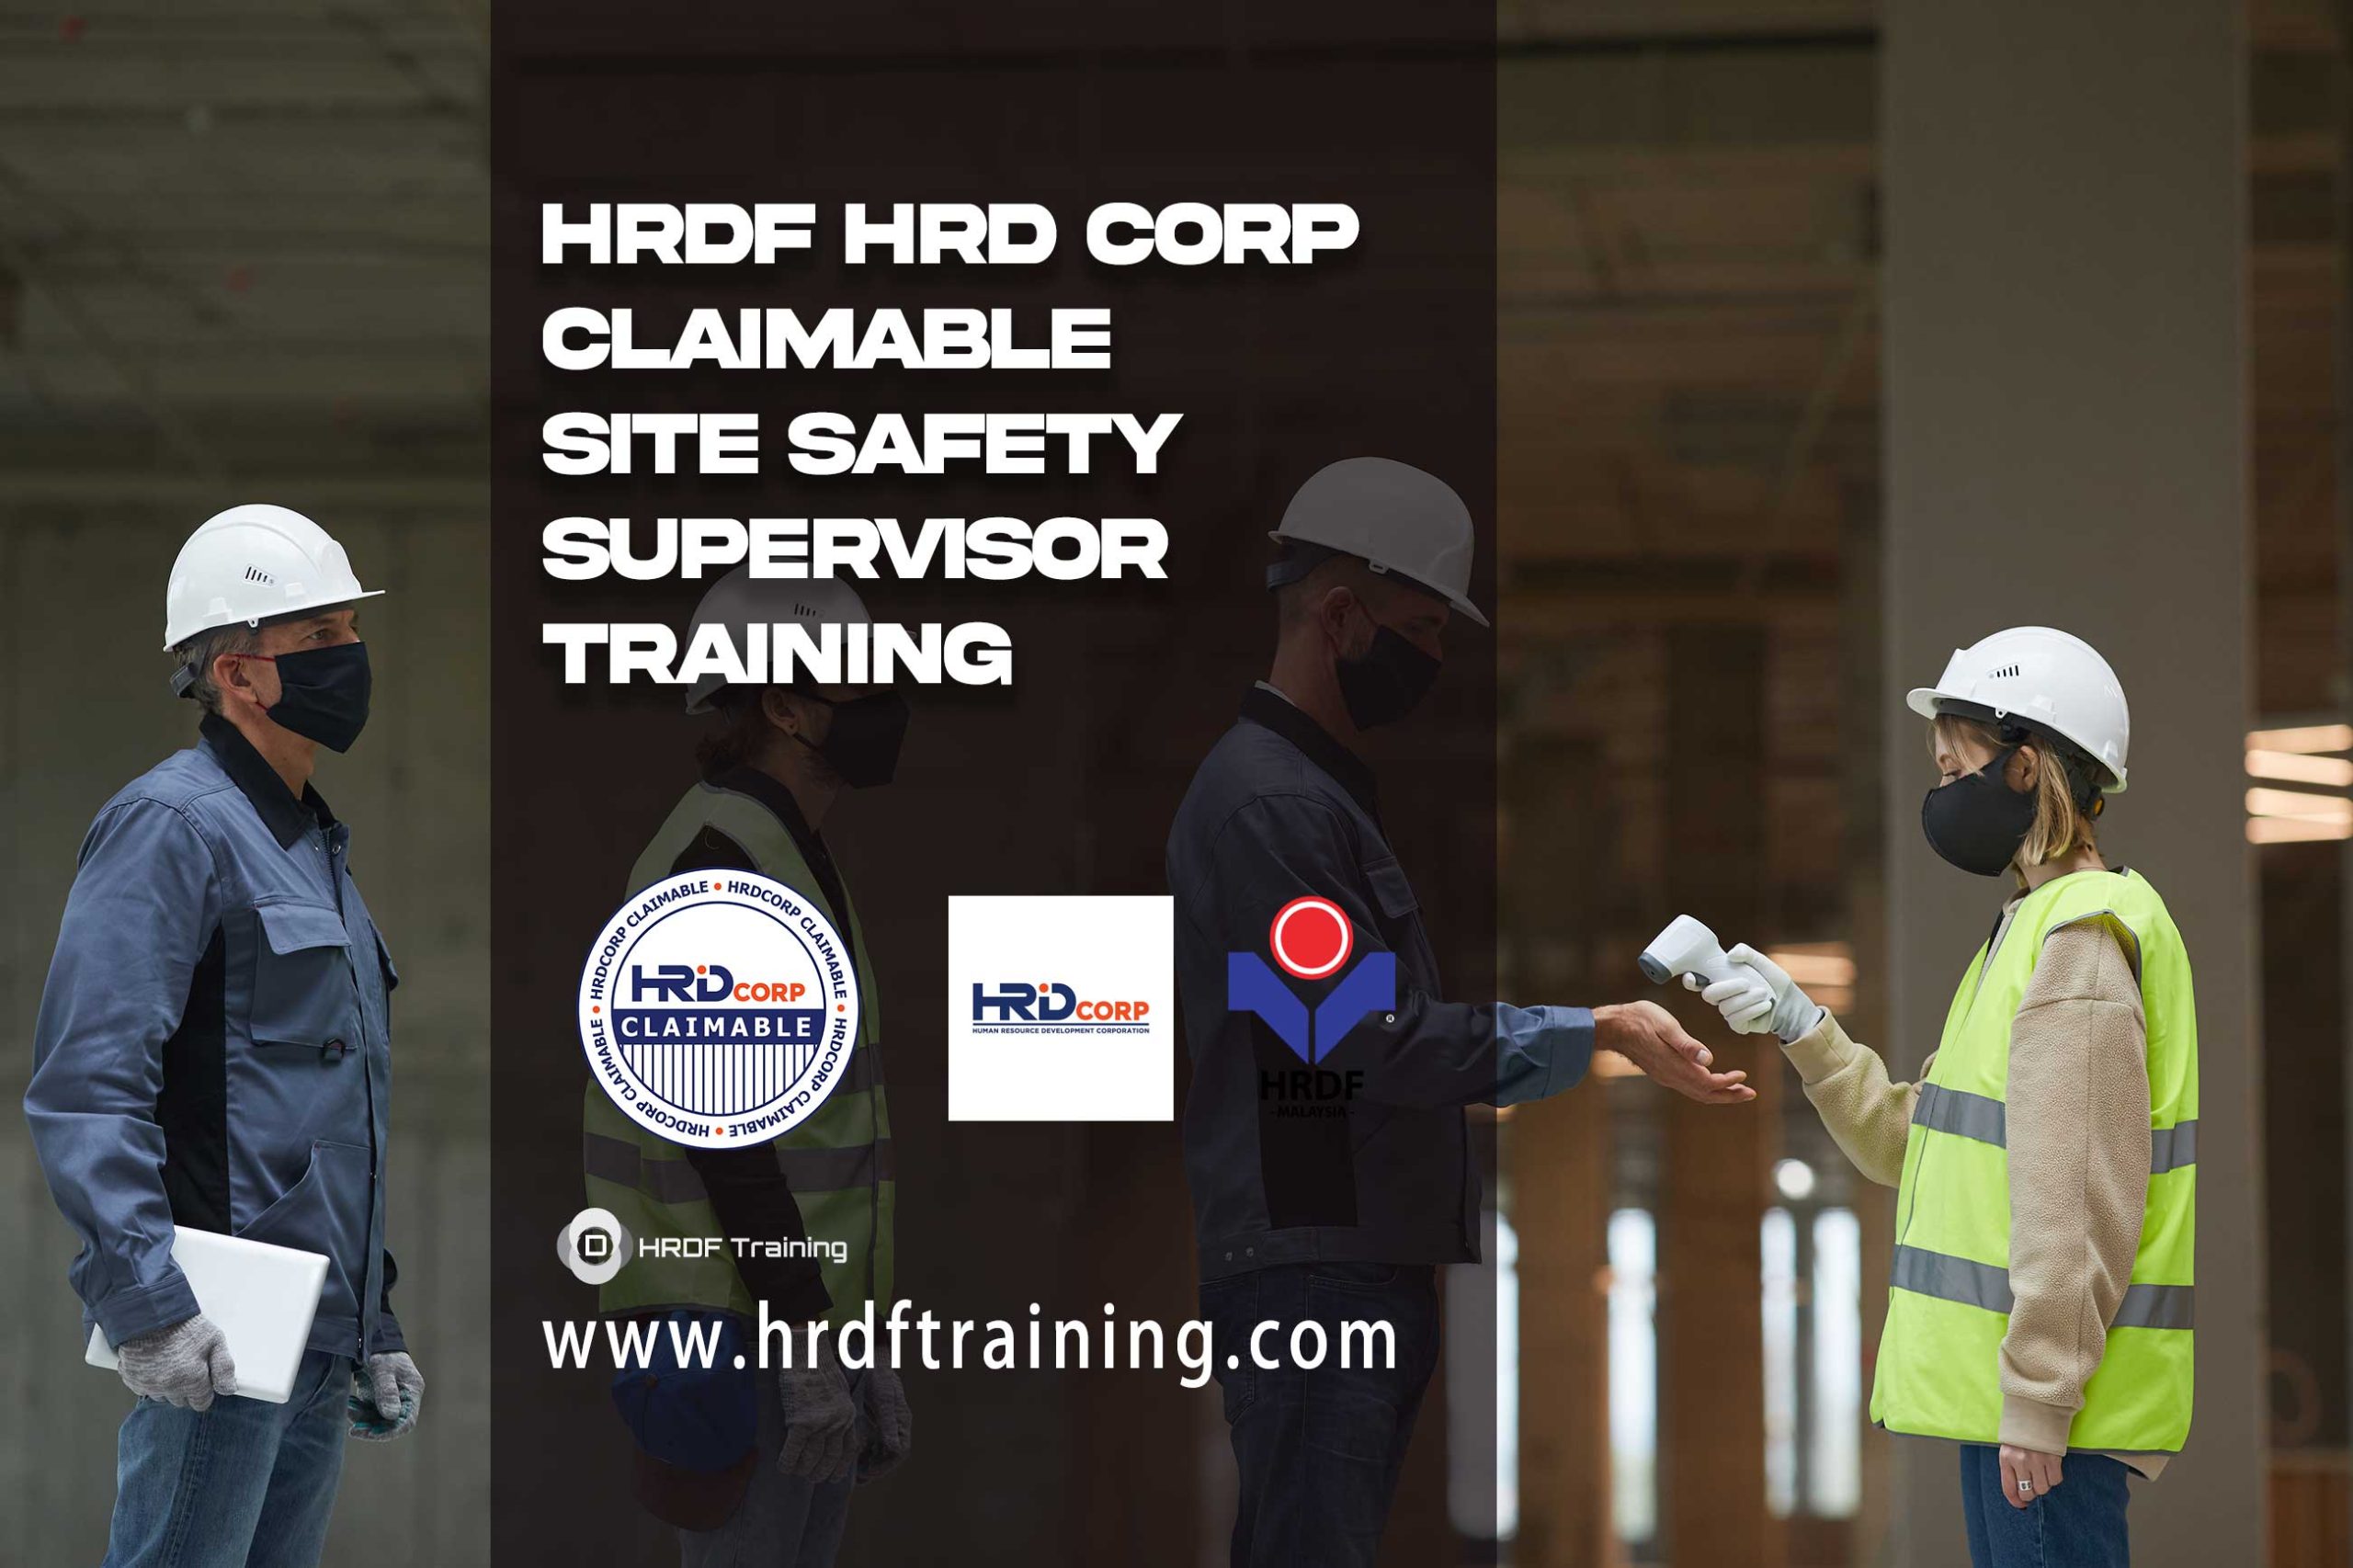 HRDF-HRD-Corp-Claimable-Site-Safety-Supervisor-Training